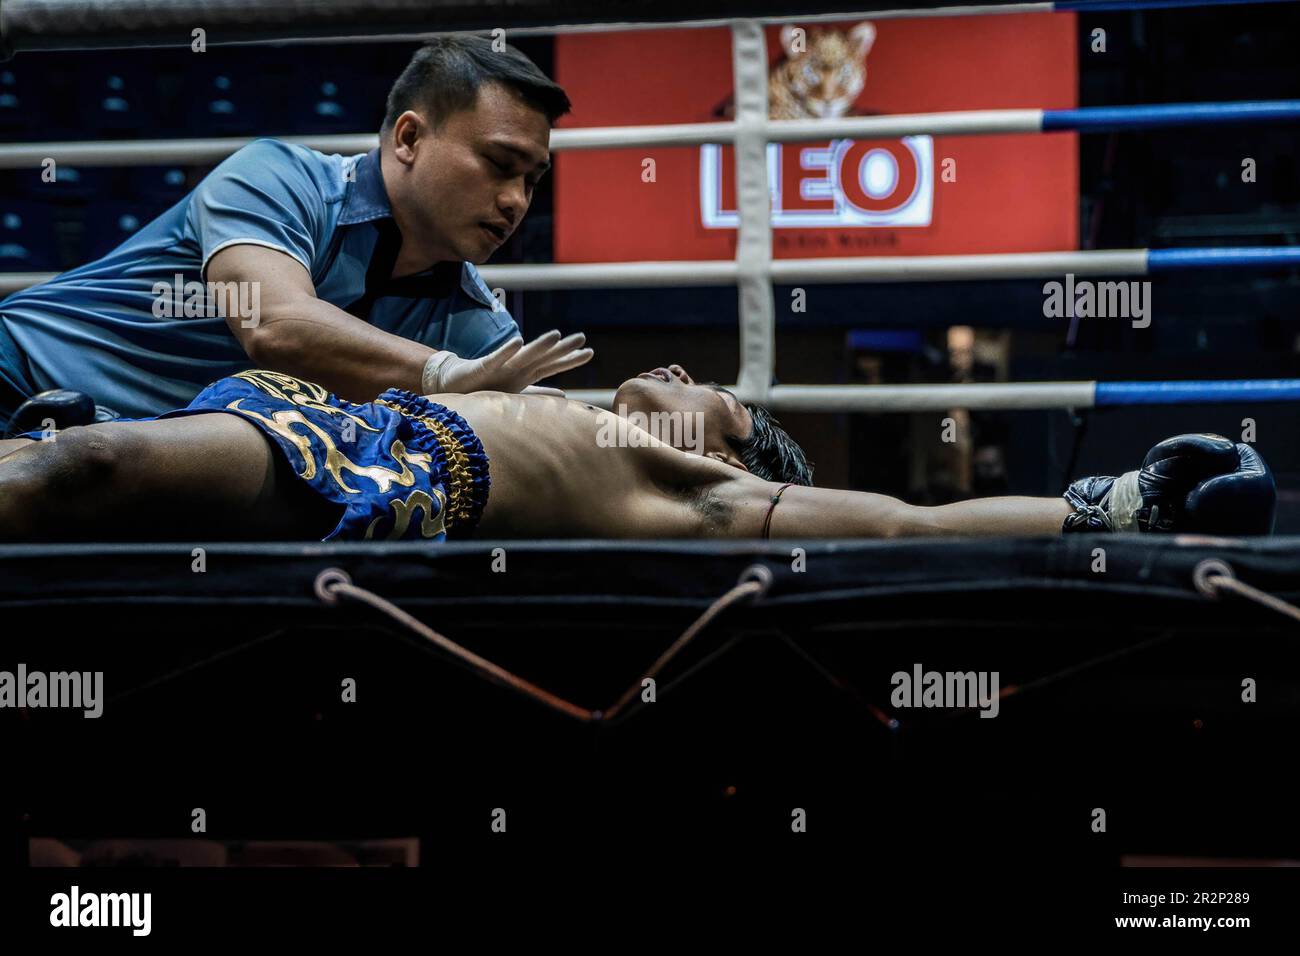 Bangkok, Thailand. 07th Nov, 2022. A referee seen counting out after a Muay Thai boxer is knocked down, at Bangkok's Rajadamnern stadium. Muay Thai fights at Thailand's iconic boxing Rajadamnern stadium, the dream stage for competitors and it is favourite for combat sports all over the world. (Photo by Nathalie Jamois/SOPA Images/Sipa USA) Credit: Sipa USA/Alamy Live News Stock Photo